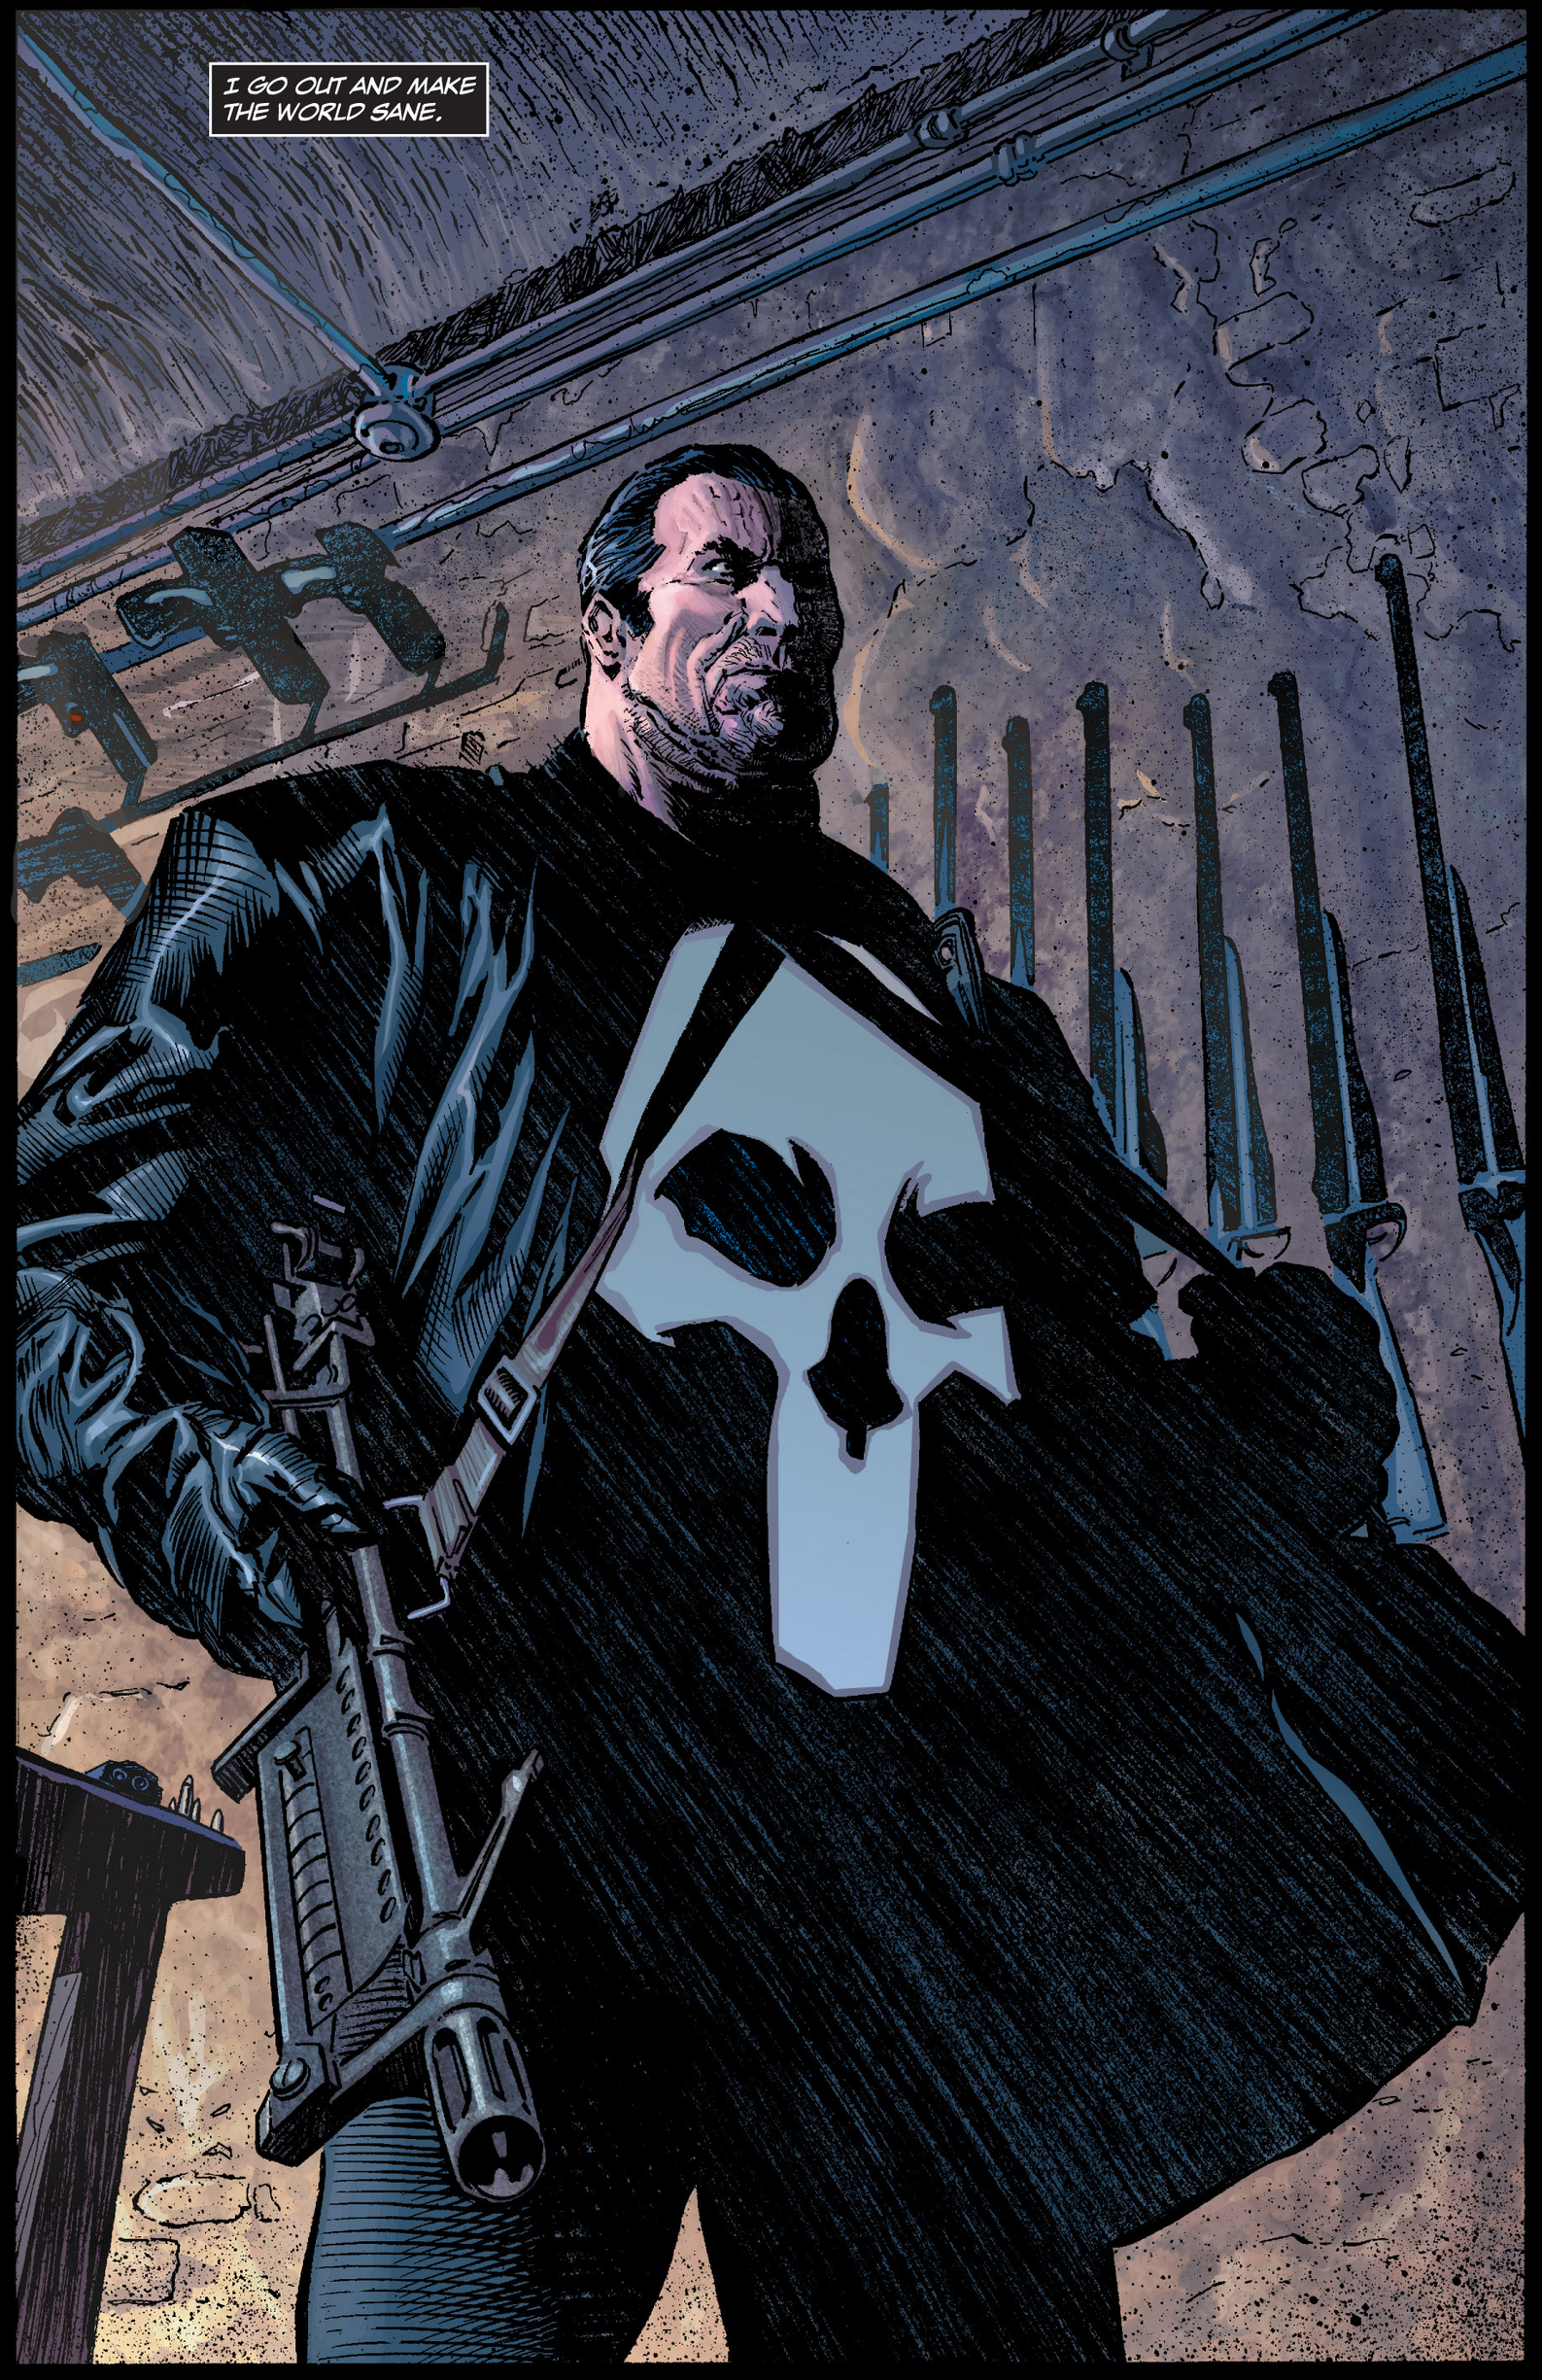 Marvel Writer Garth Ennis Says Outrage Against The Punisher, Skull Symbol Is “A Massive Pointless Distraction”